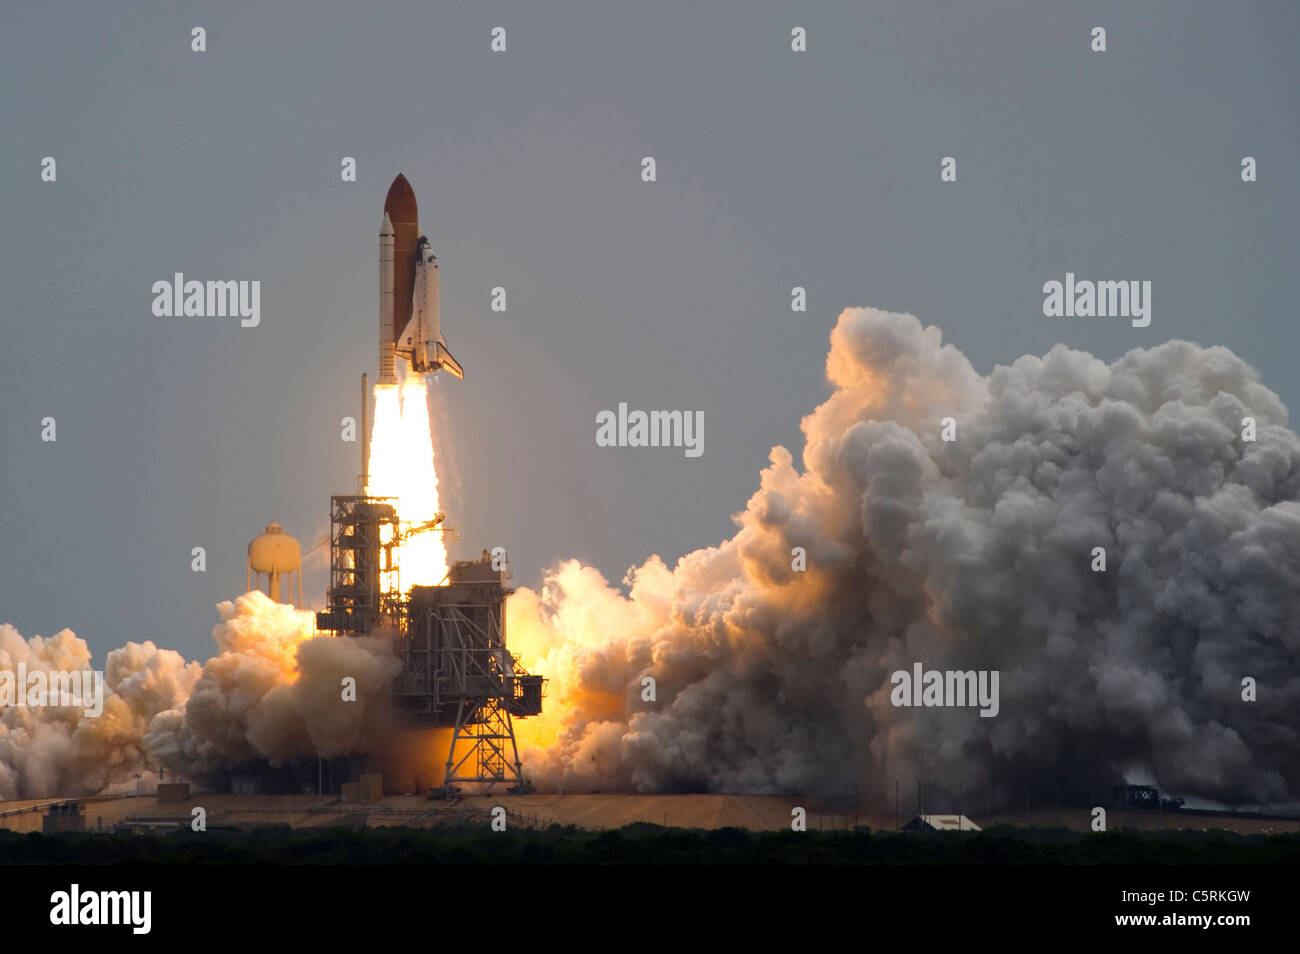 The Space Shuttle Atlantis lifts off from Kennedy Space Center for the last time during NASA's final space shuttle mission. Stock Photo